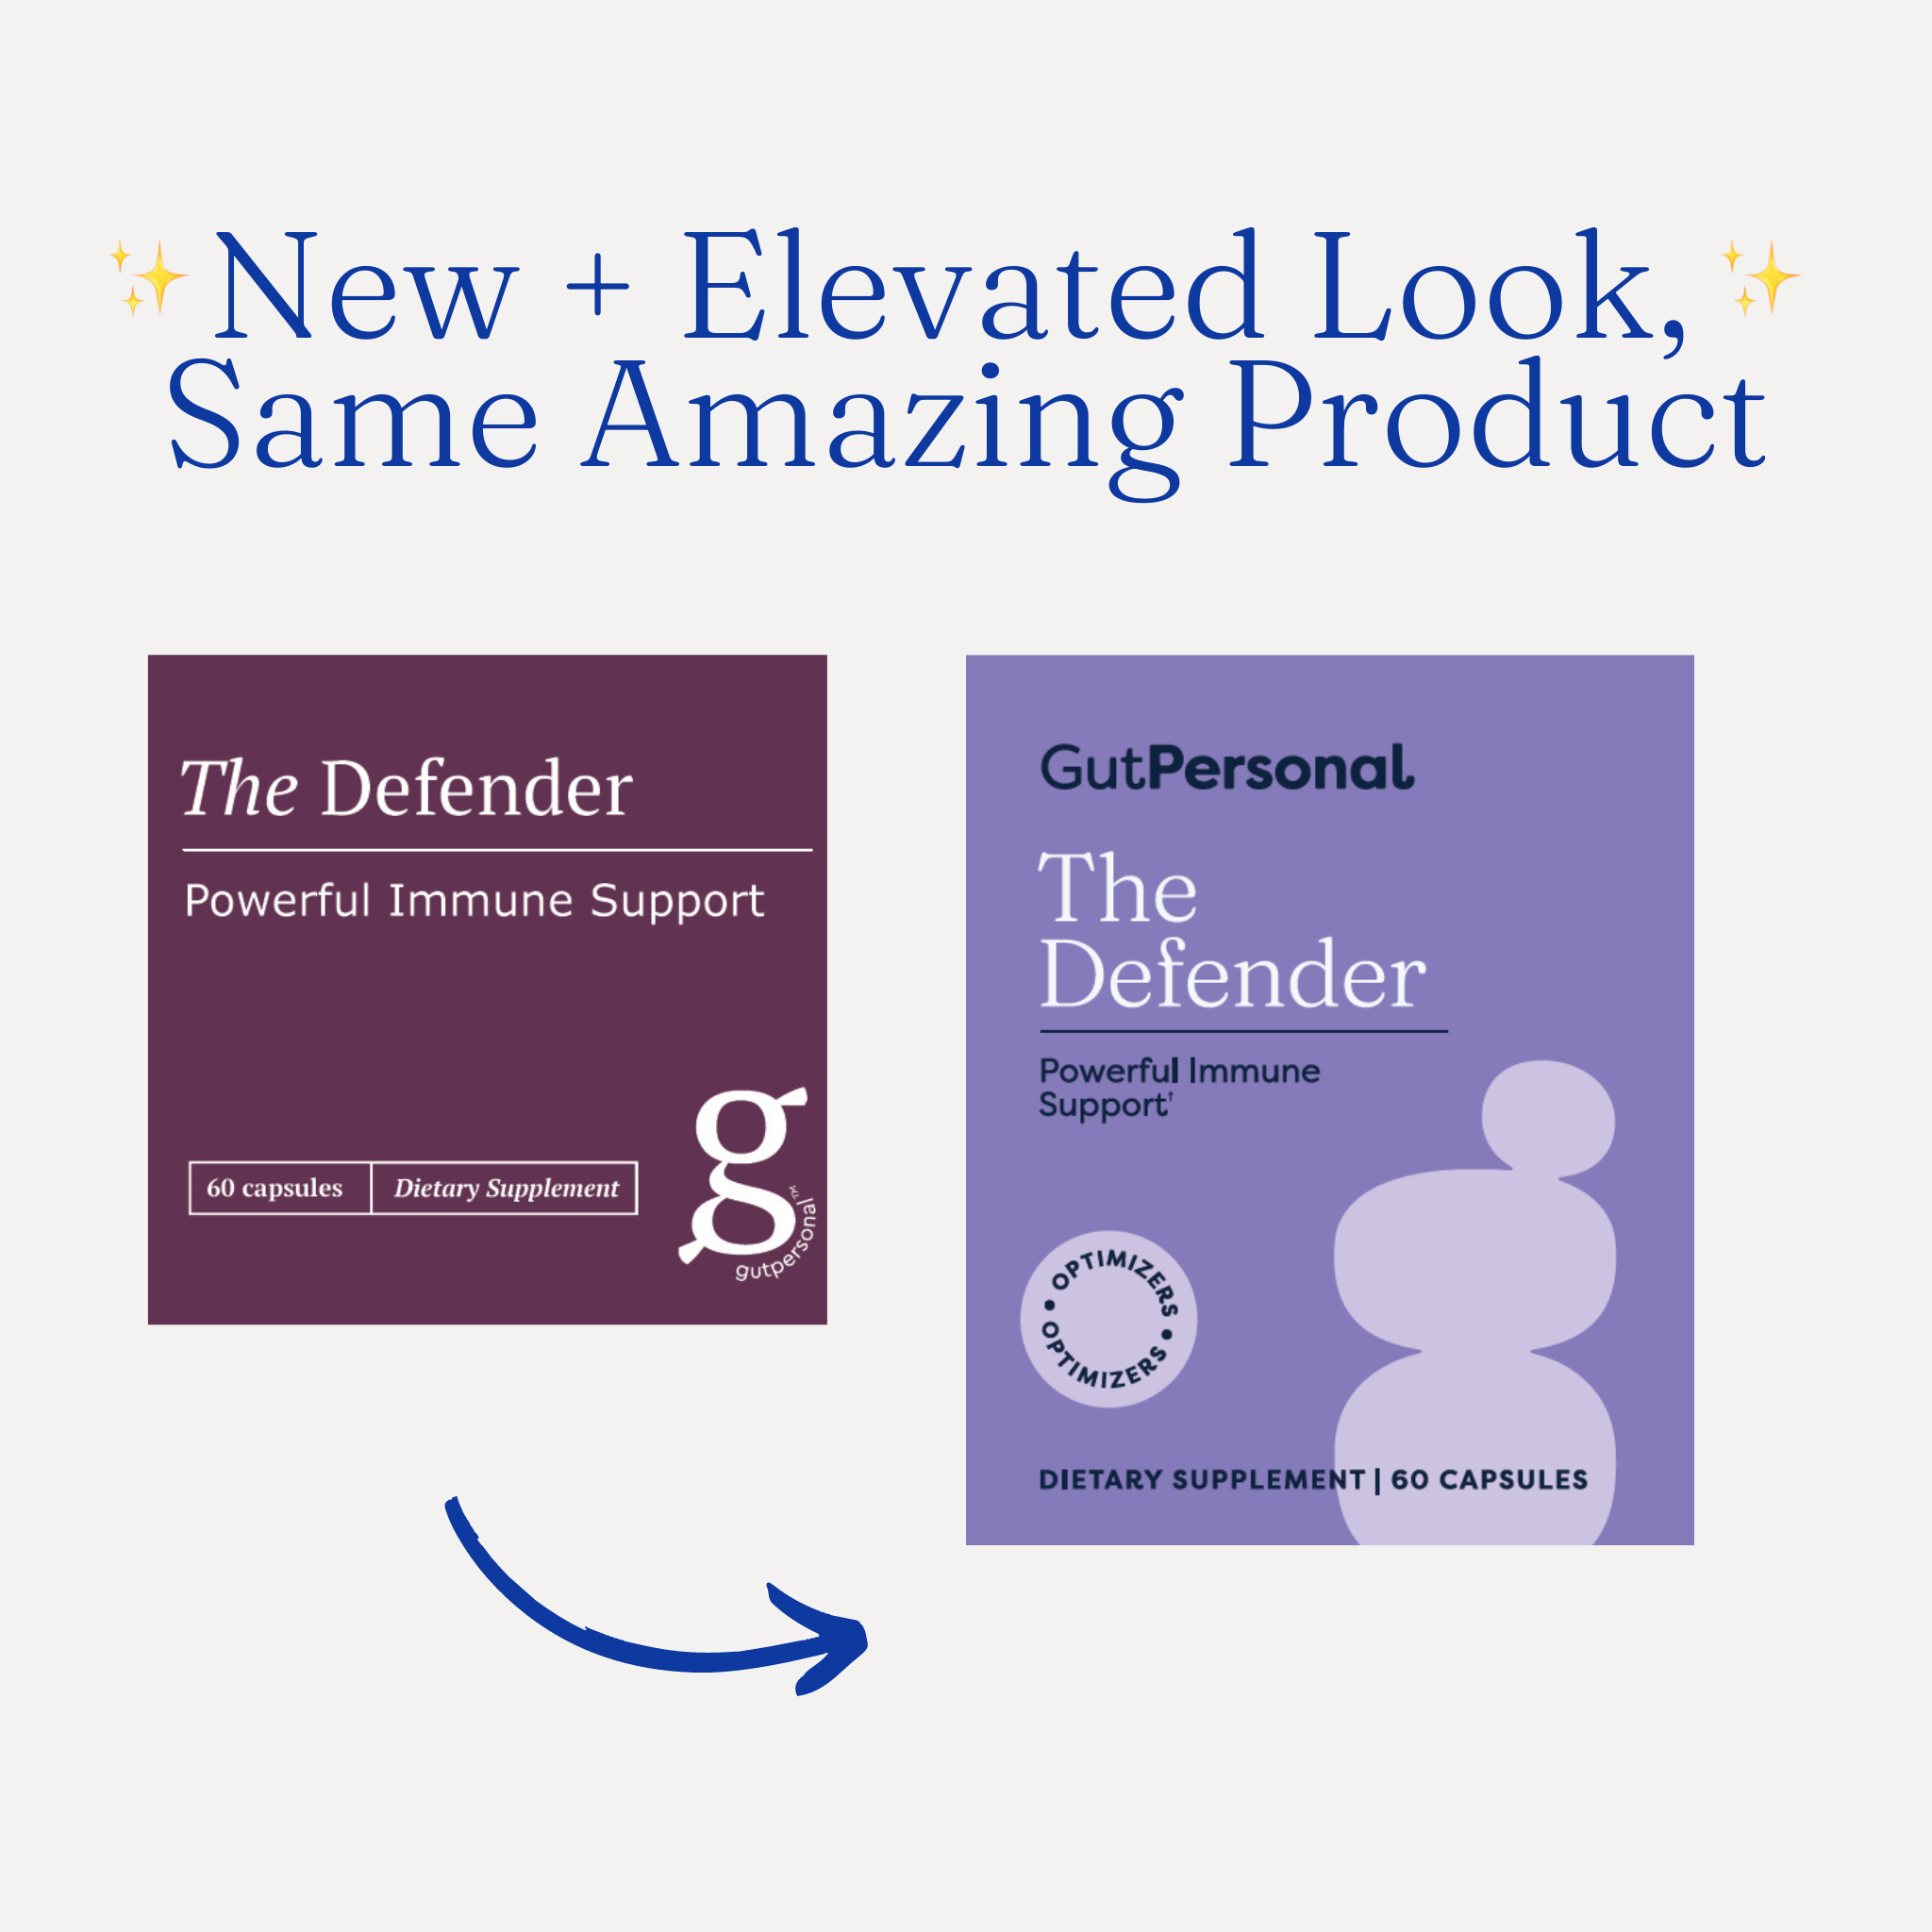 The Defender: Powerful Immune Support